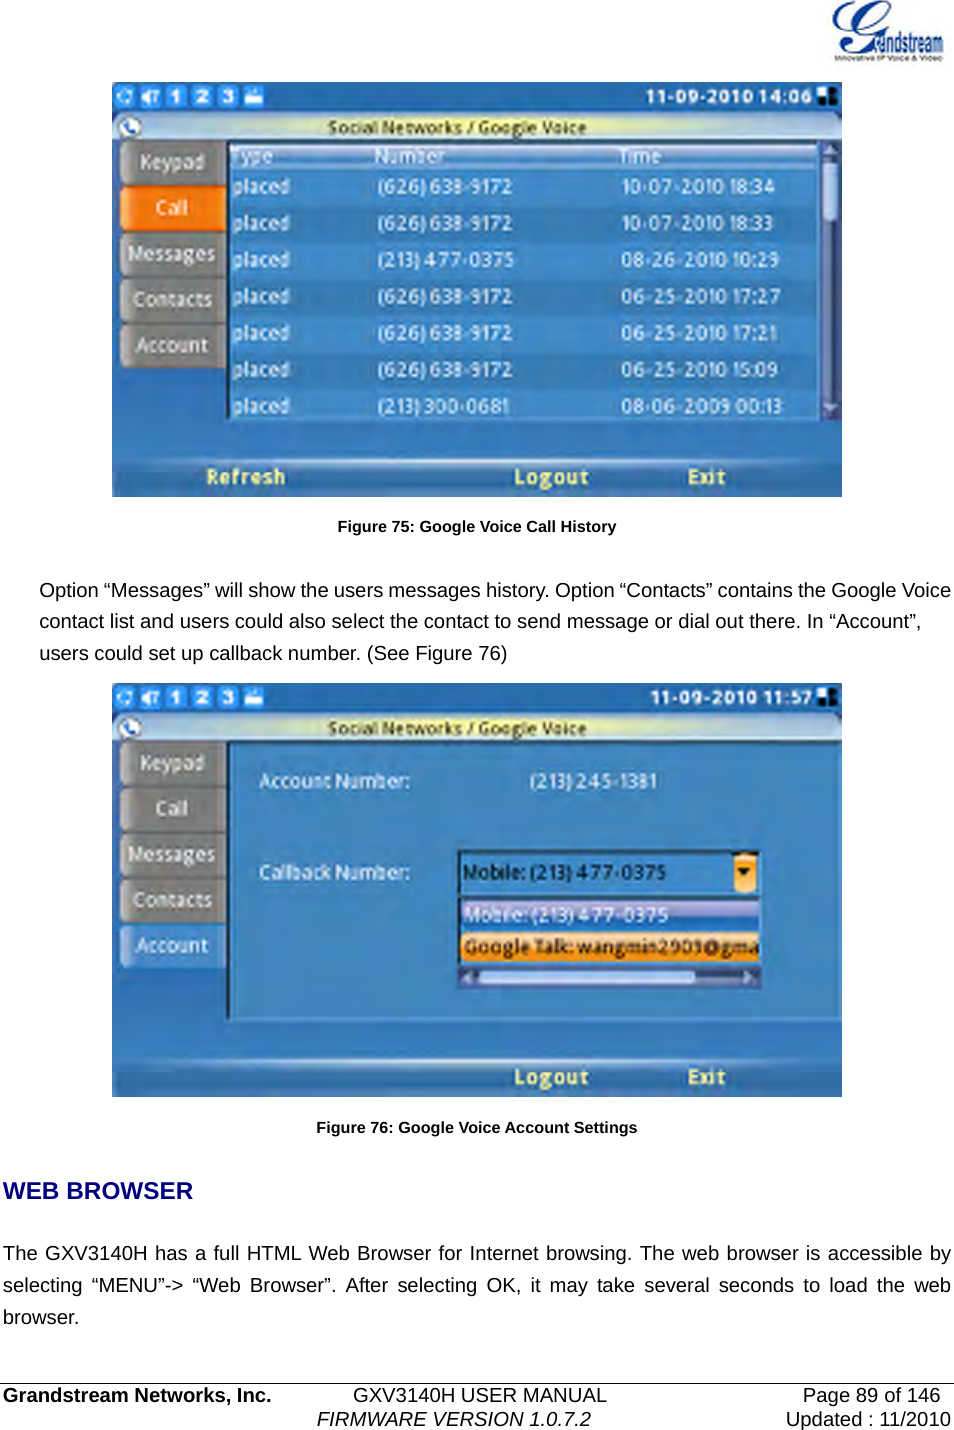   Grandstream Networks, Inc.        GXV3140H USER MANUAL                  Page 89 of 146                                FIRMWARE VERSION 1.0.7.2 Updated : 11/2010   Figure 75: Google Voice Call History  Option “Messages” will show the users messages history. Option “Contacts” contains the Google Voice contact list and users could also select the contact to send message or dial out there. In “Account”, users could set up callback number. (See Figure 76)  Figure 76: Google Voice Account Settings  WEB BROWSER  The GXV3140H has a full HTML Web Browser for Internet browsing. The web browser is accessible by selecting “MENU”-&gt; “Web Browser”. After selecting OK, it may take several seconds to load the web browser.  